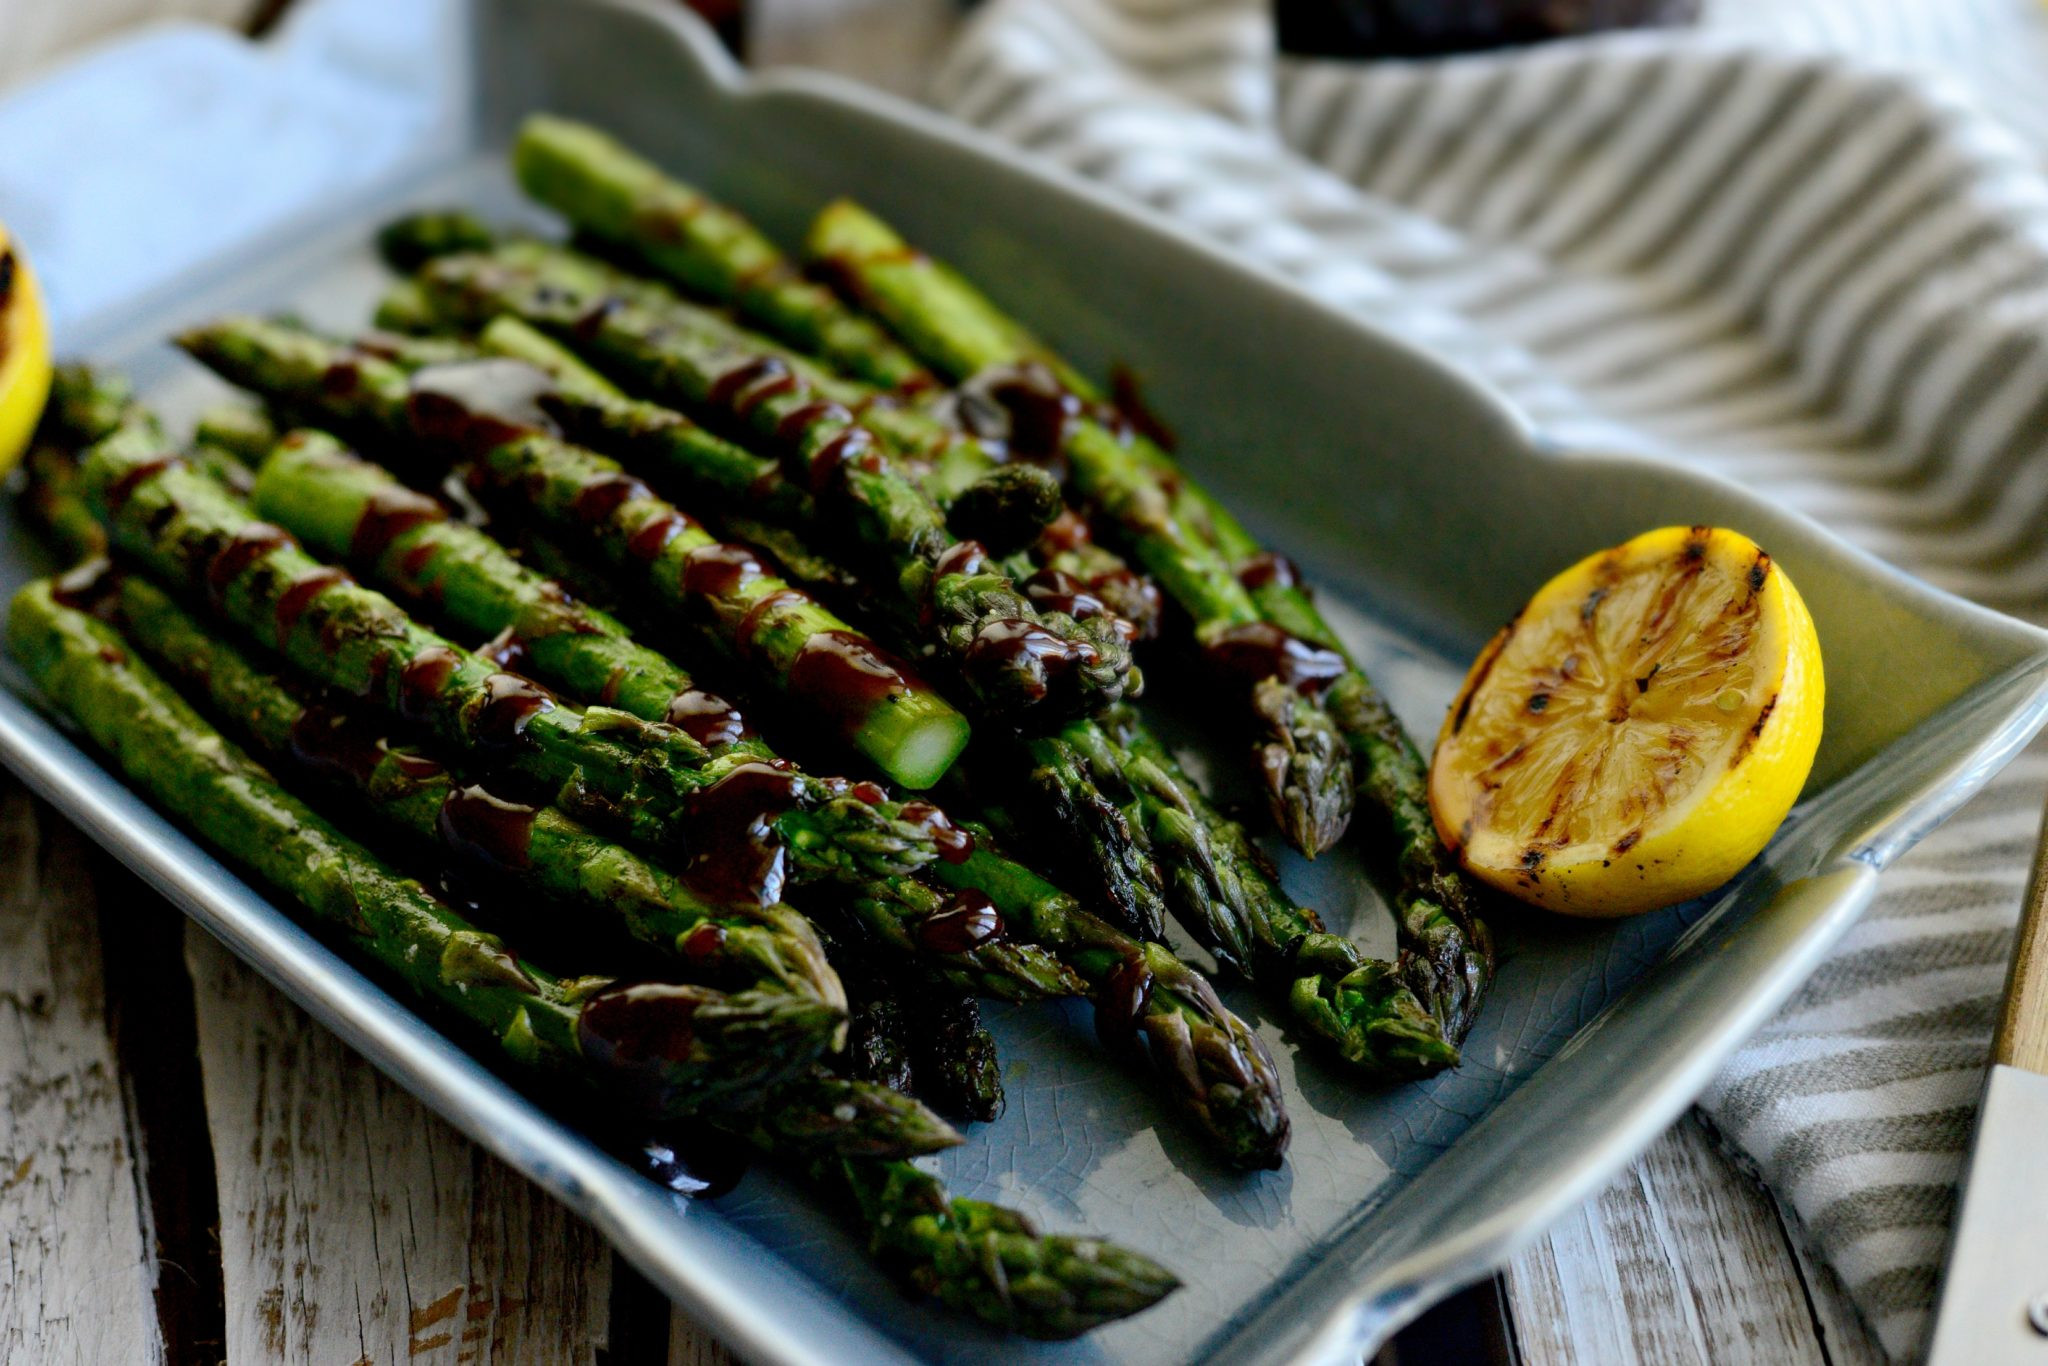 Recipes for Grilling asparagus Beautiful Grilled asparagus with Dijon Mustard Balsamic Vinegar and